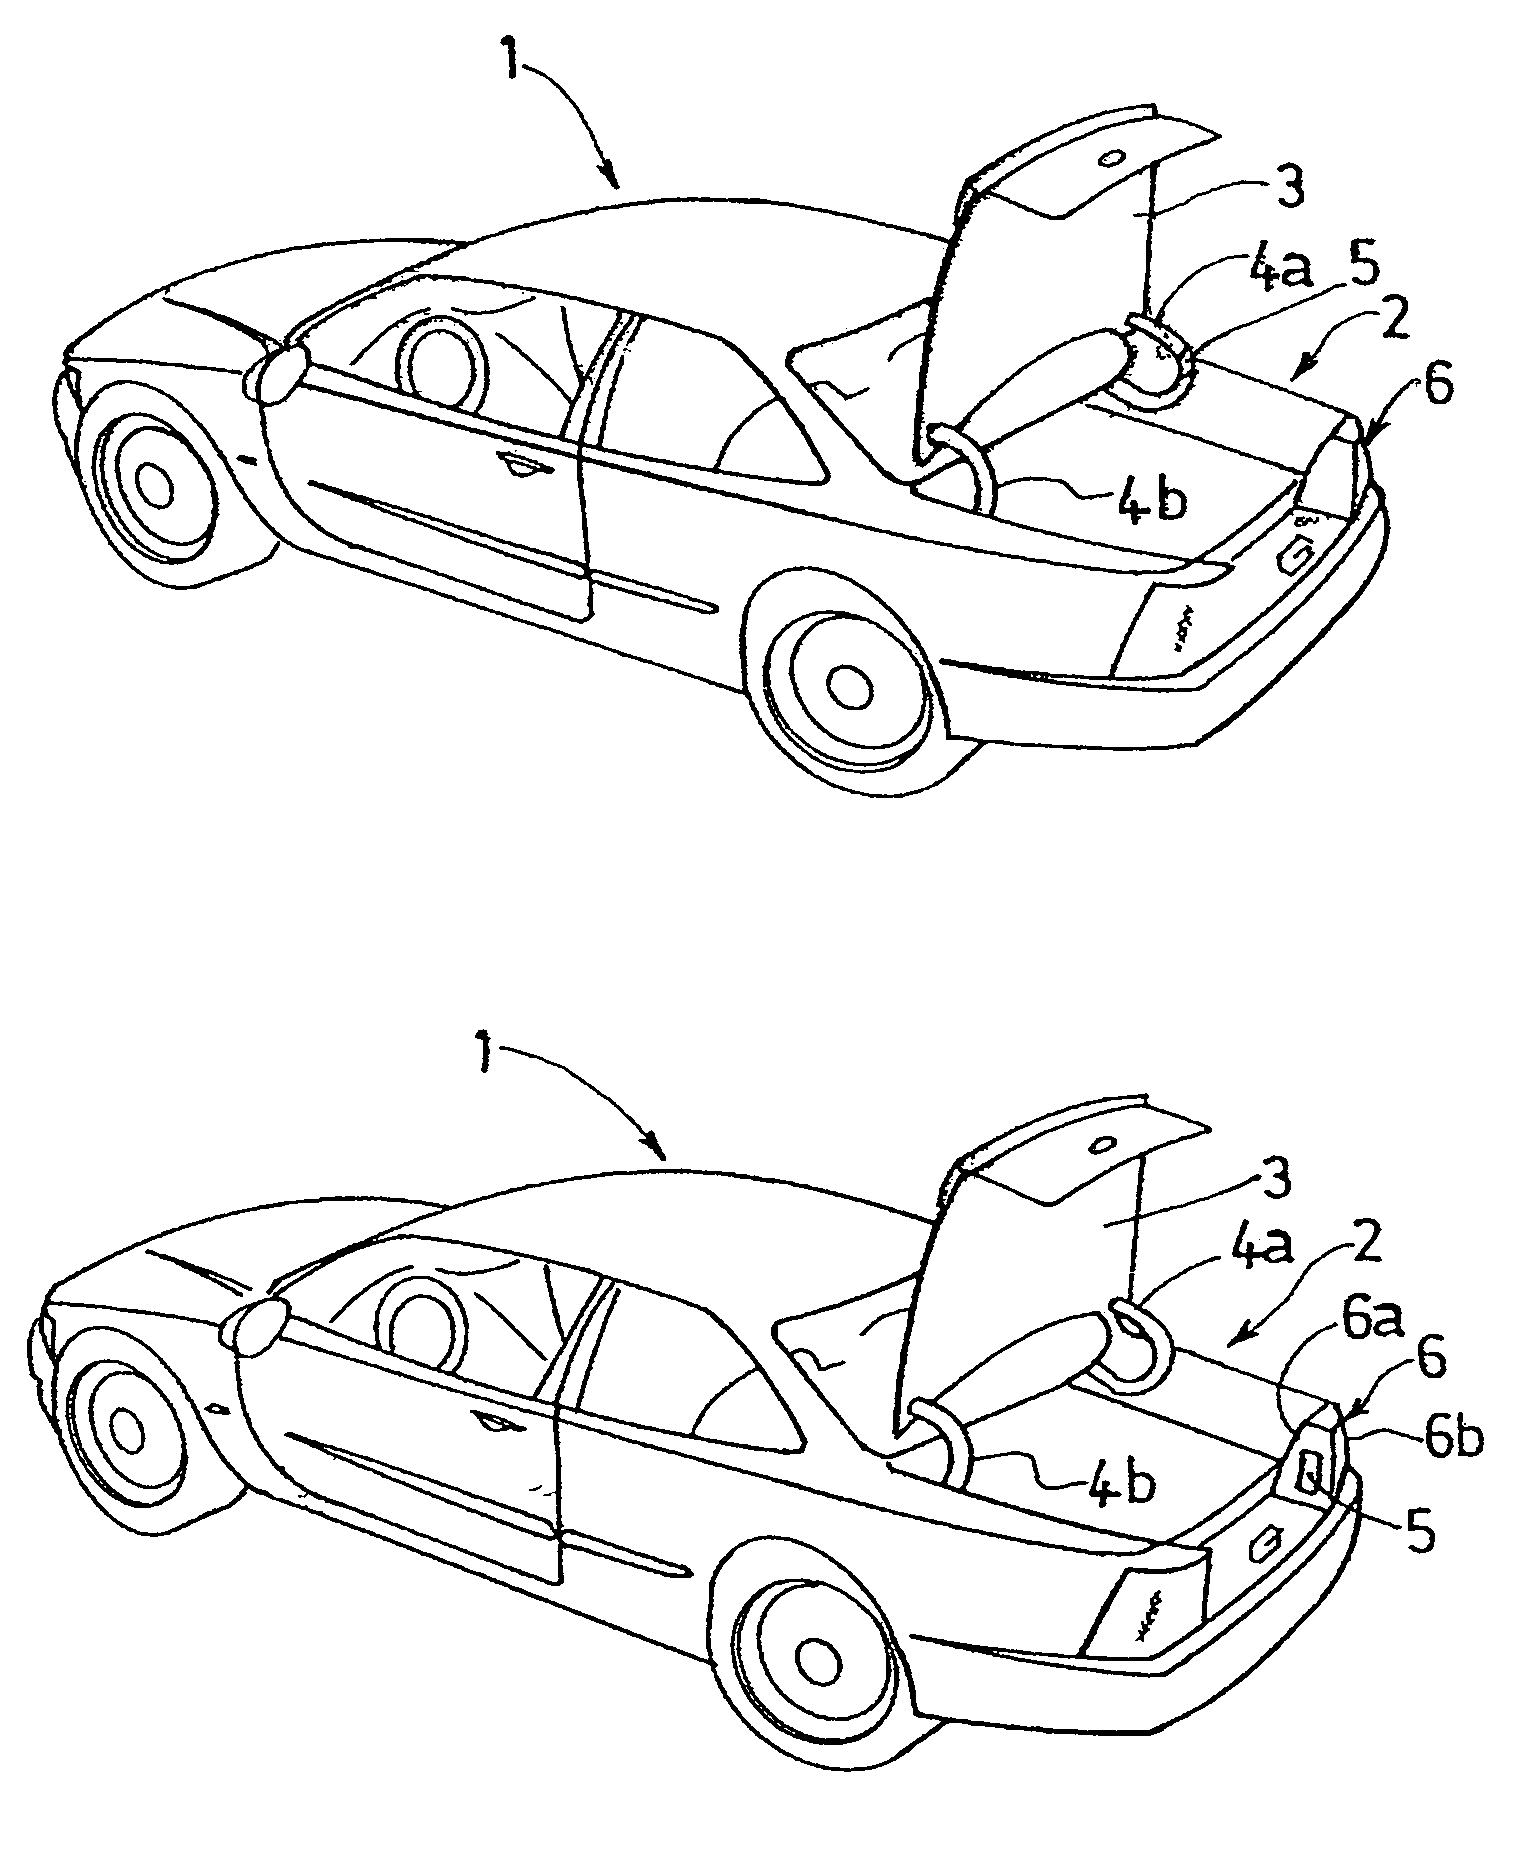 Motorized trunk-closing system for automotive vehicle